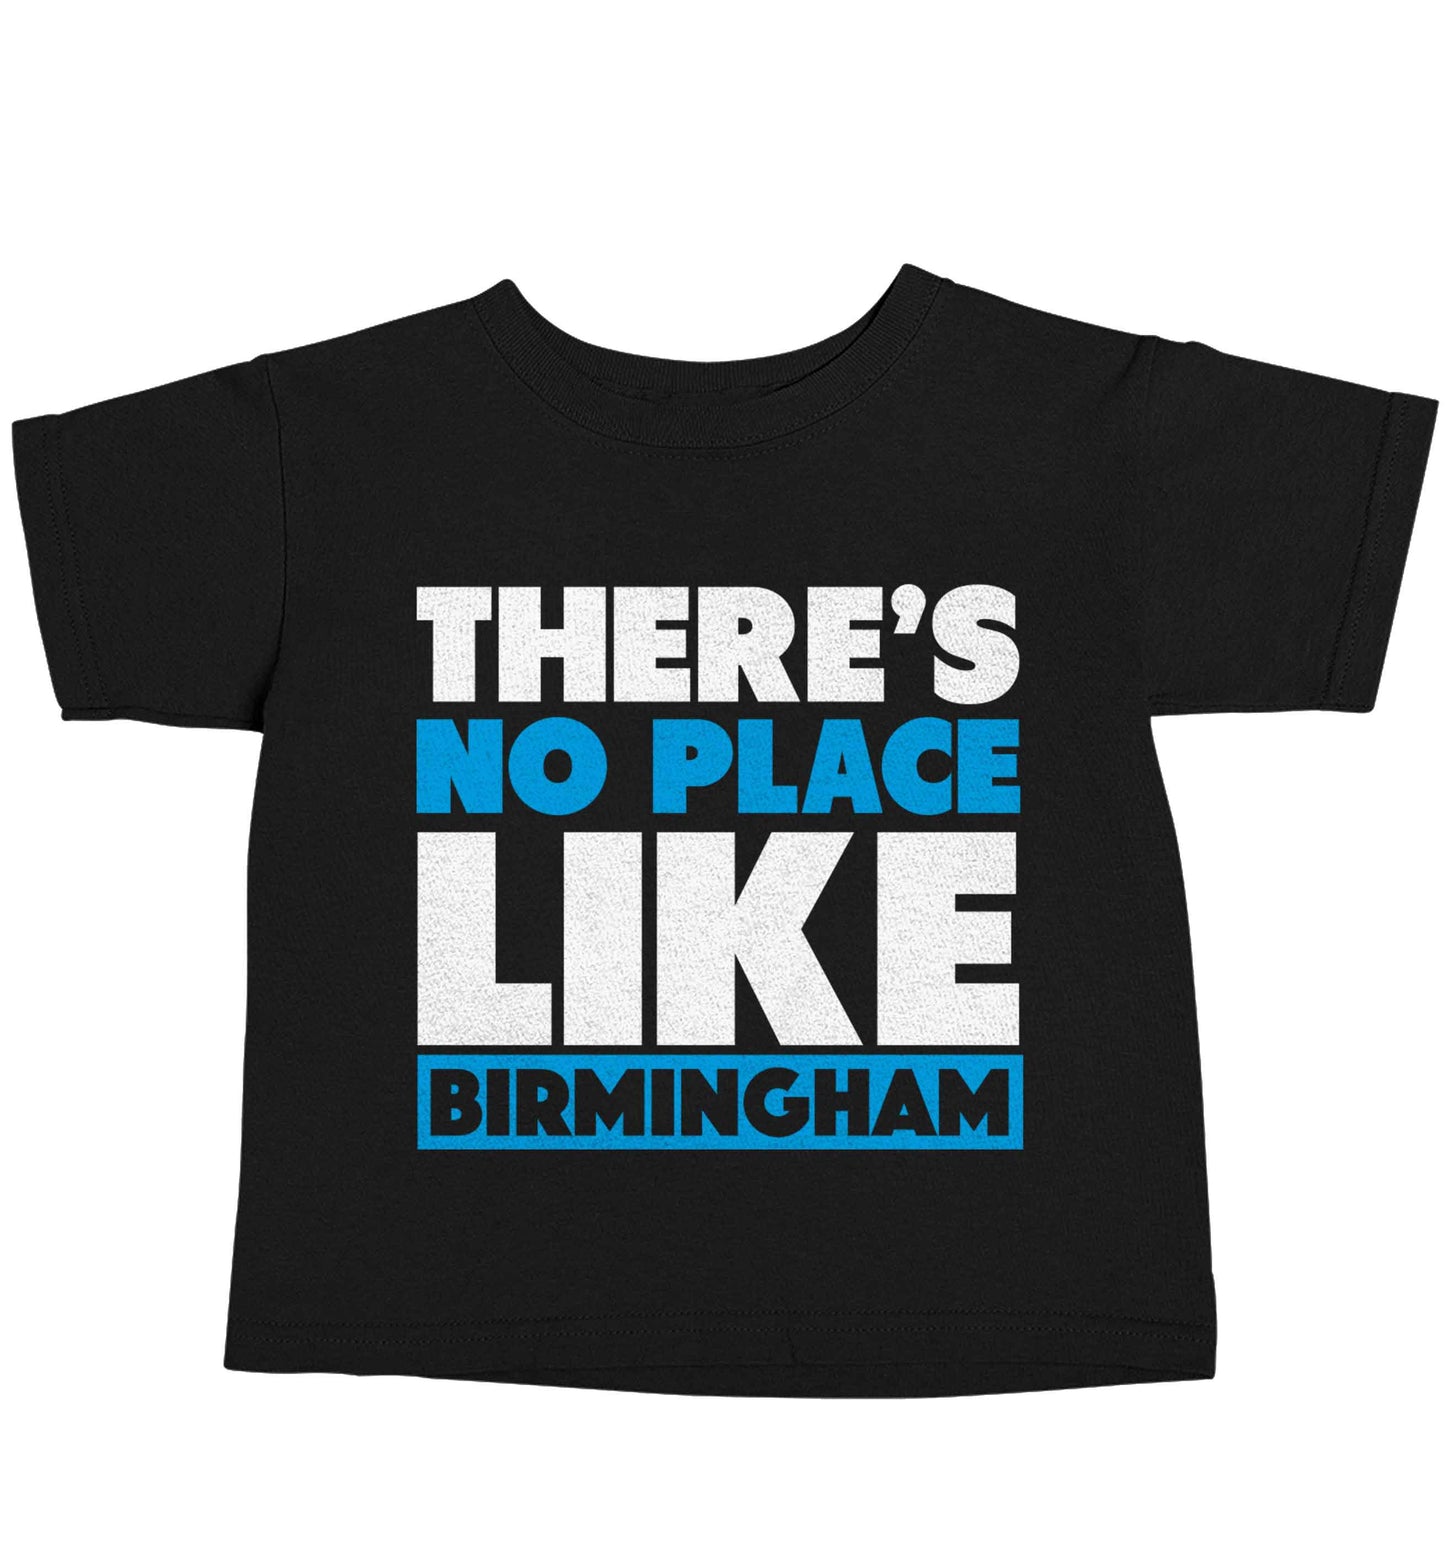 There's no place like Birmingham Black baby toddler Tshirt 2 years